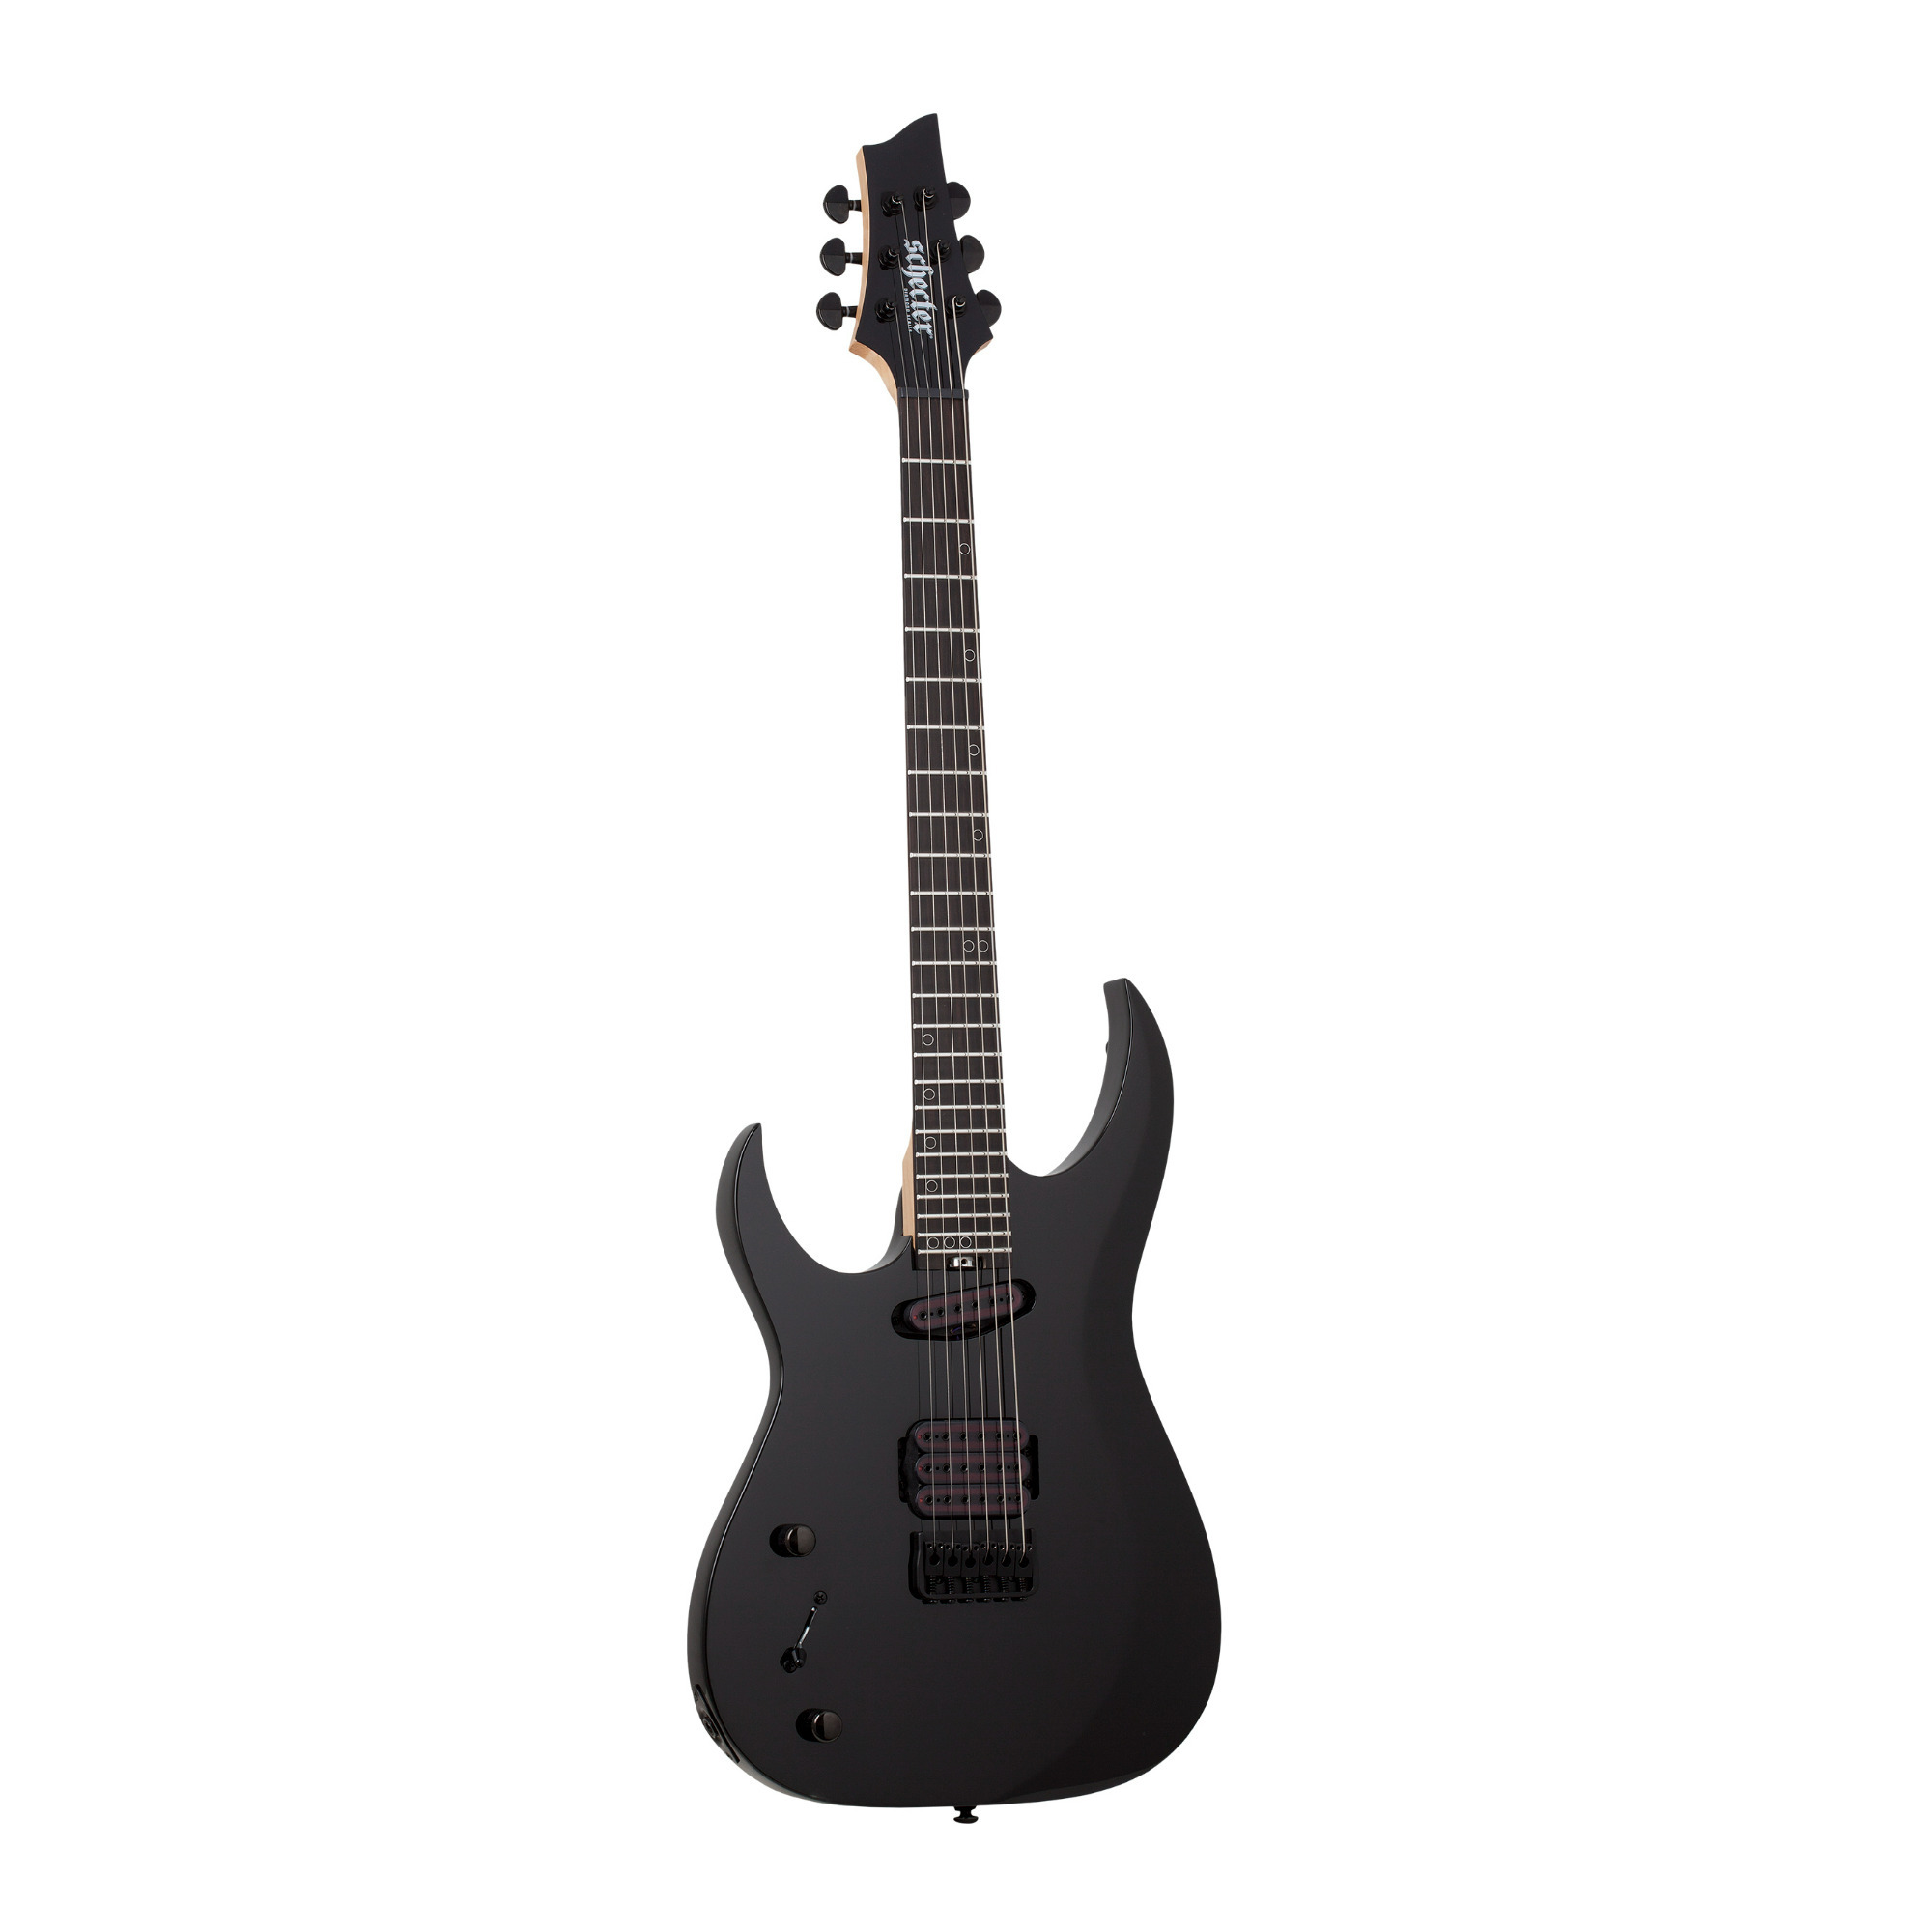 Schecter Sunset-6 Triad 6-String Electric Guitar with Ebony Fretboard (Left-Handed, Gloss Black) -  SGR-2578